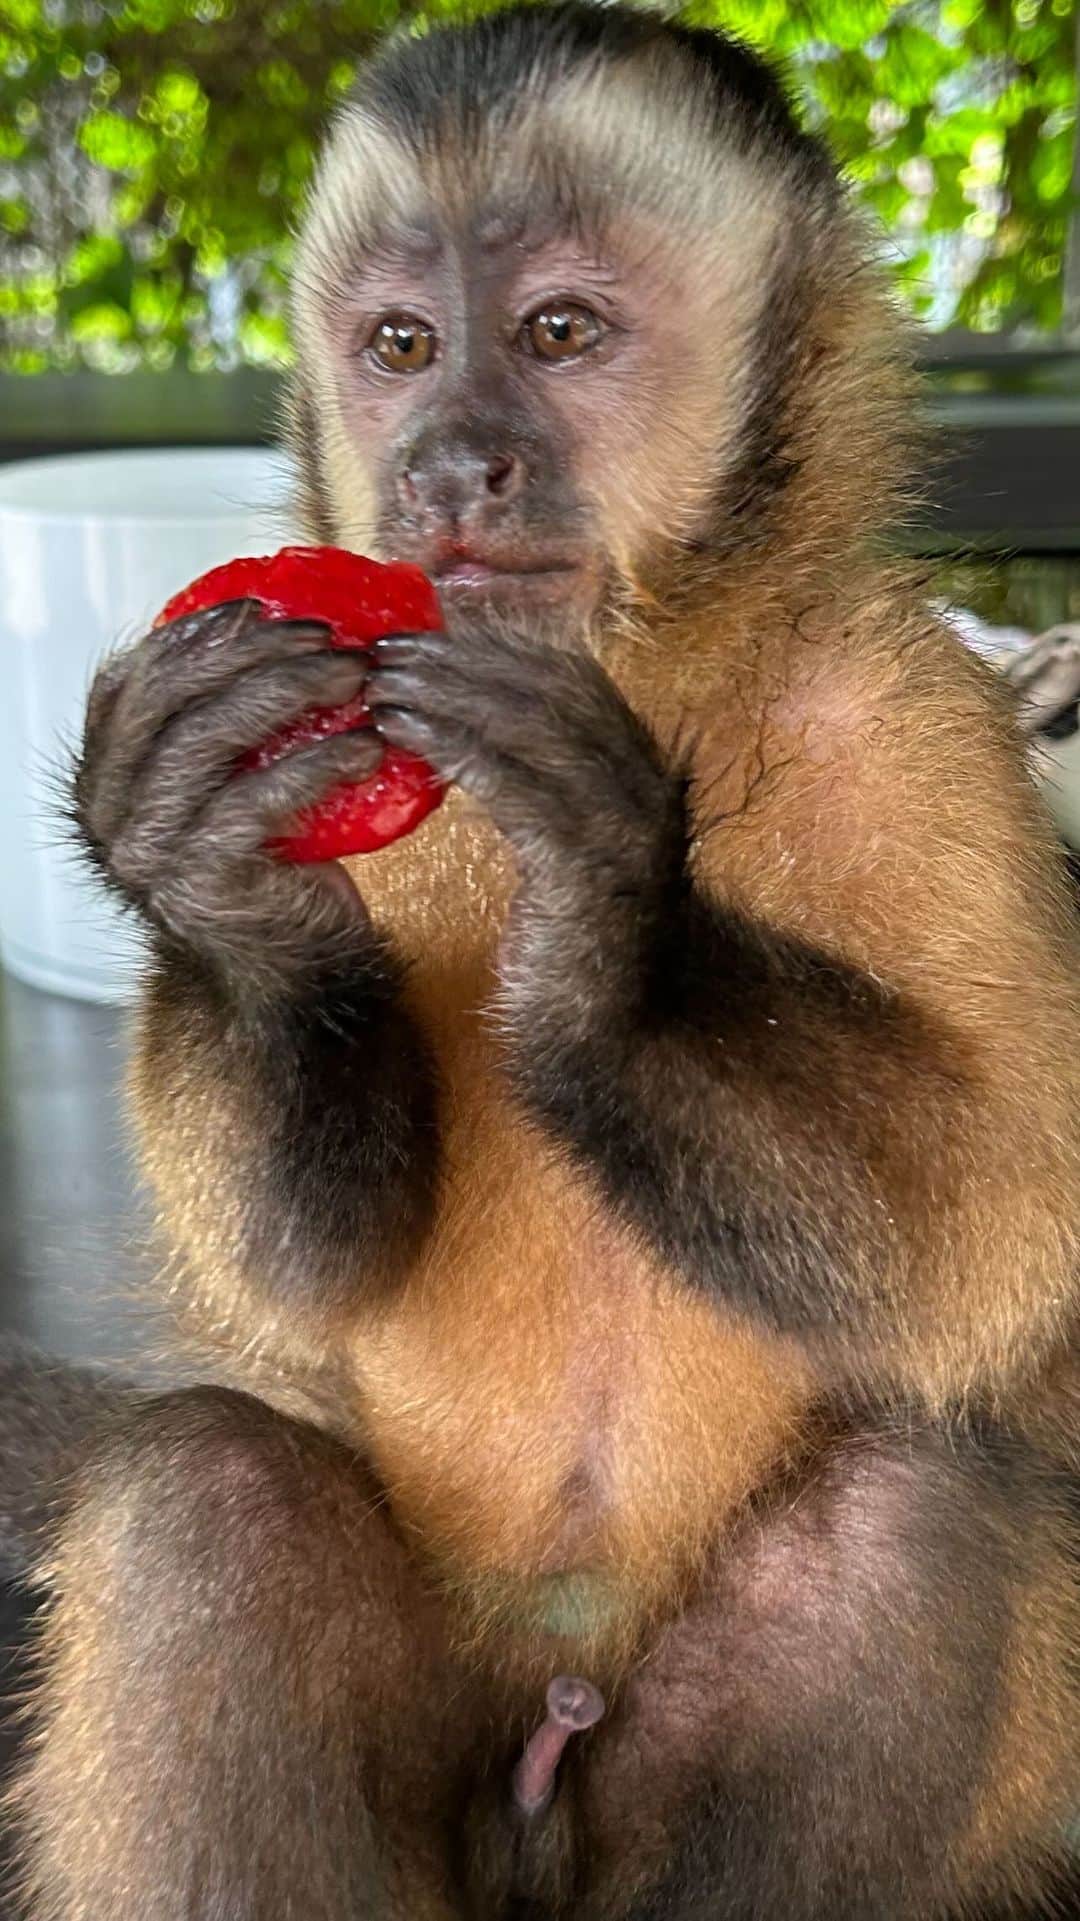 Zoological Wildlife Foundationのインスタグラム：「@romeozwfmiami’ strawberry 🍓 face is a work of art.   Join us this #cybermonday and use code #BF50 at checkout for 50% off your next visit. #conditionsapply   #mondaymorning #strawberry」